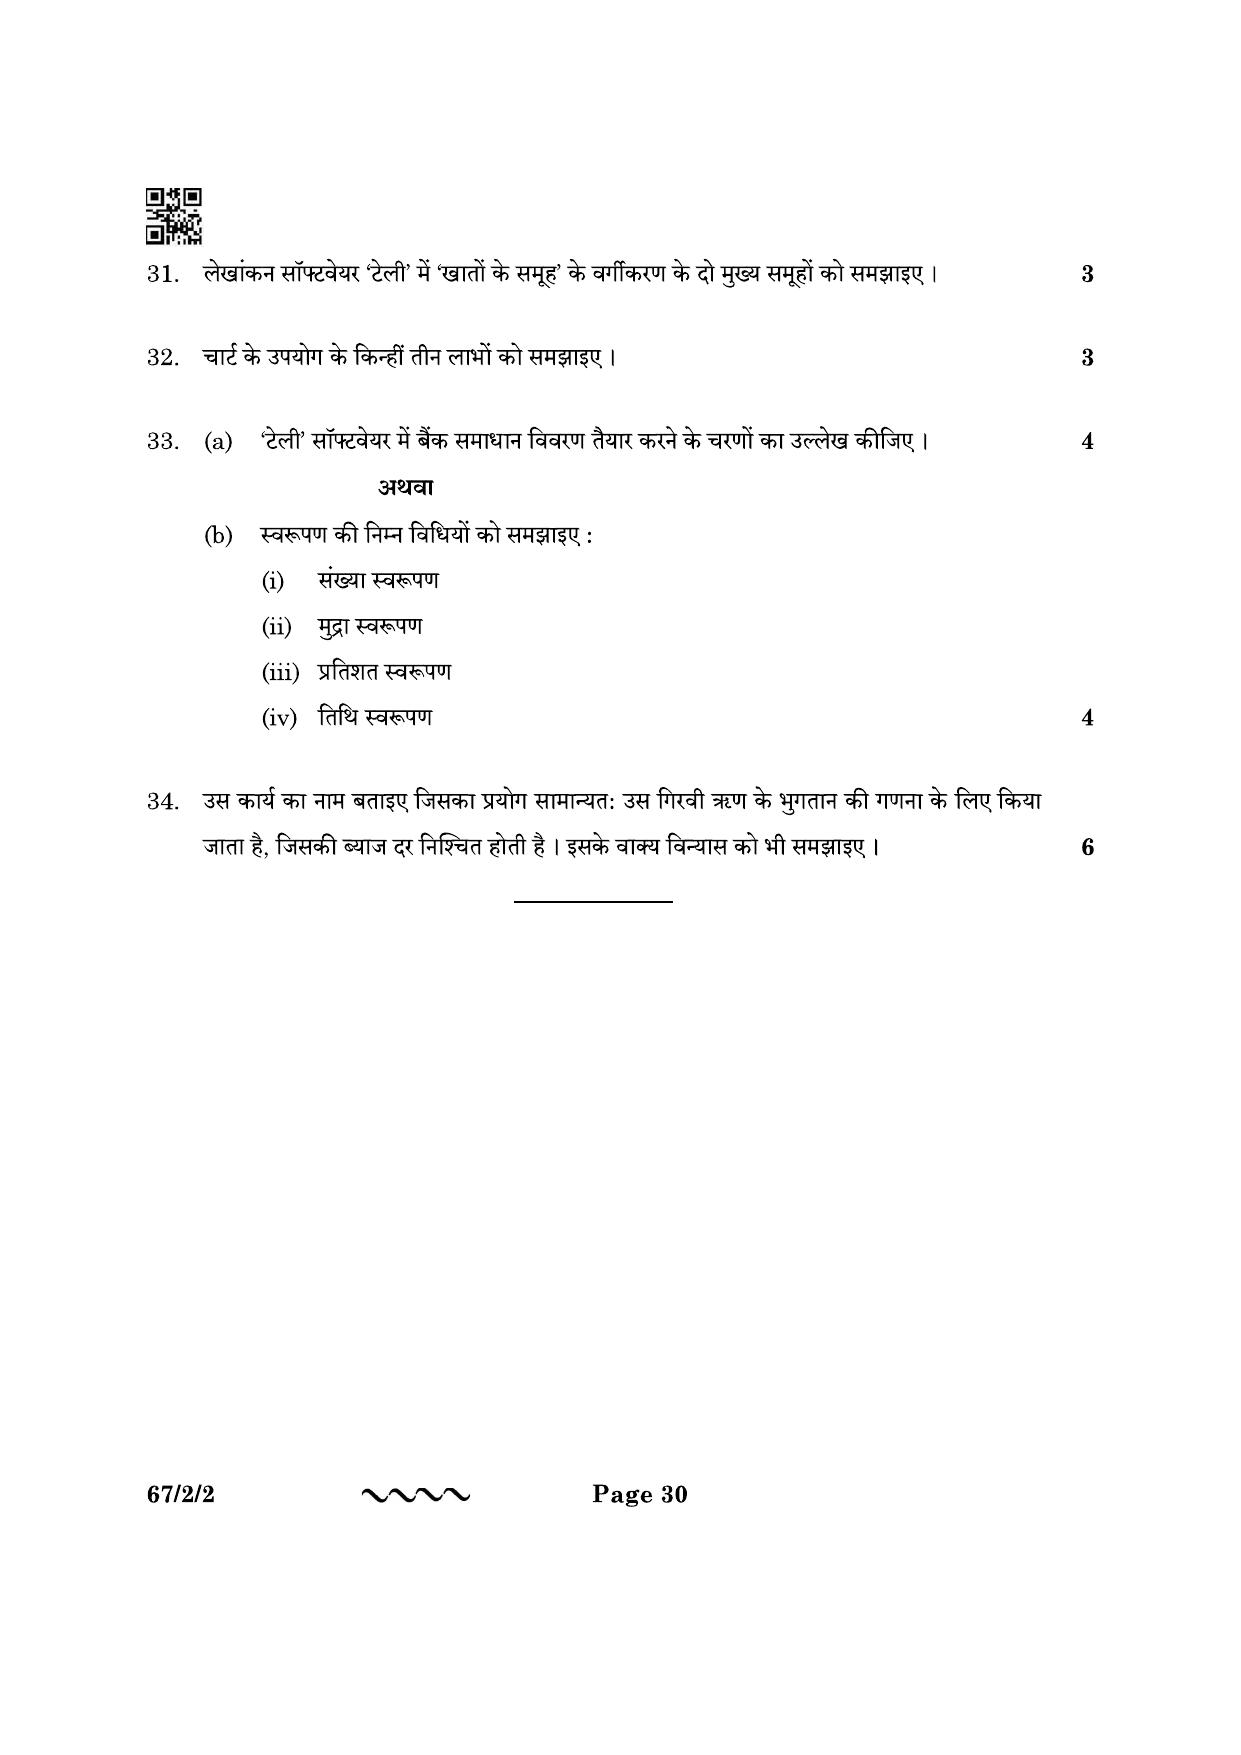 CBSE Class 12 67-2-2 Accountancy 2023 Question Paper - Page 30